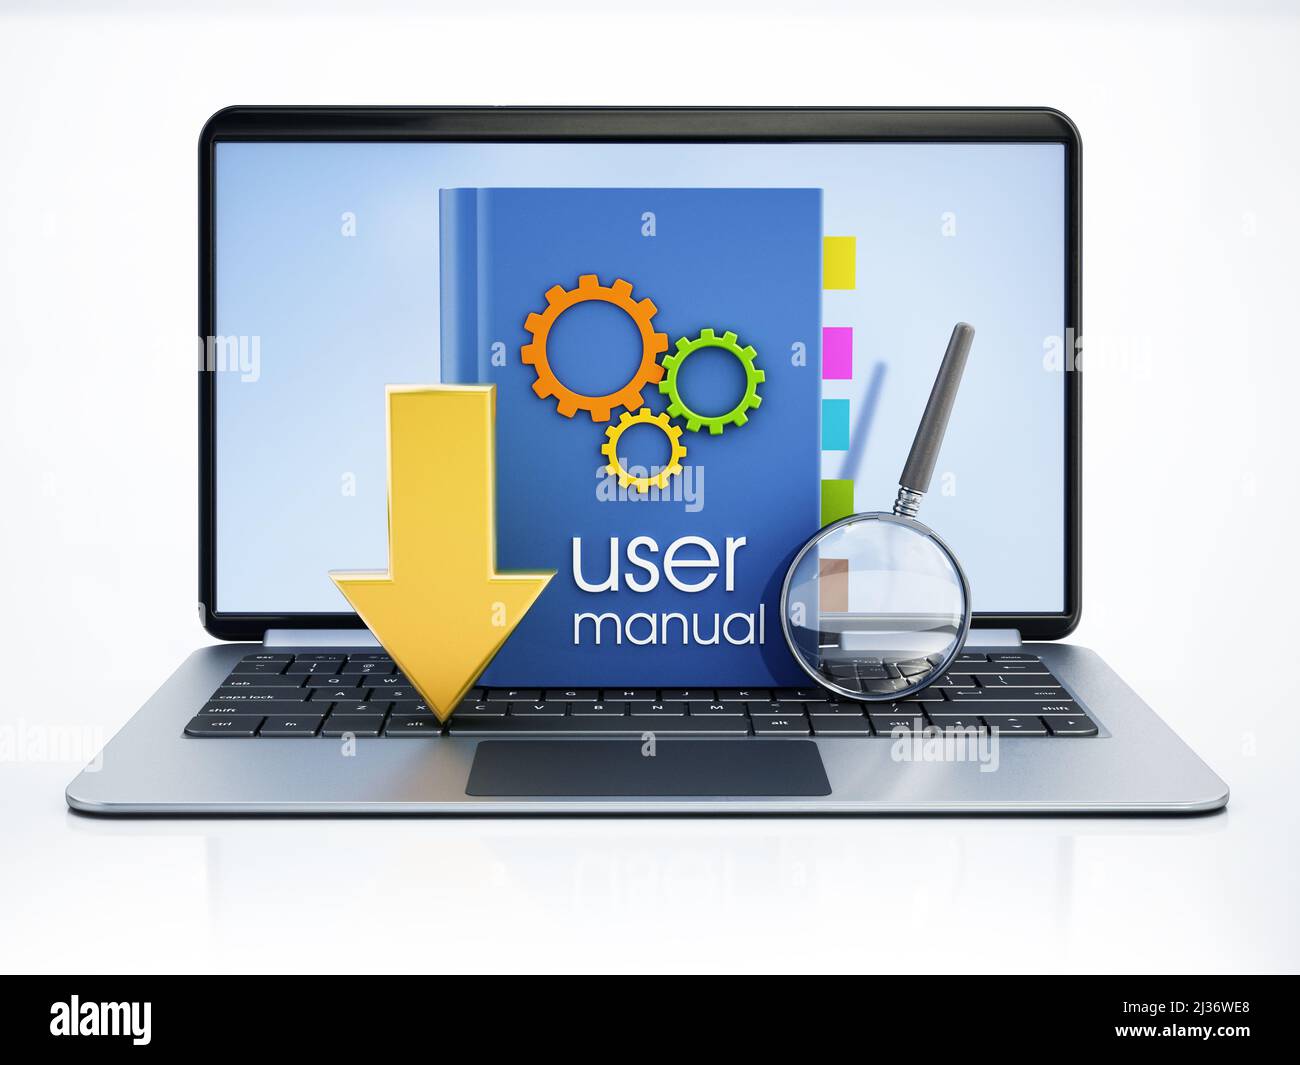 User manual, download icon and magnifying glass isolated on white background. 3D illustration. Stock Photo